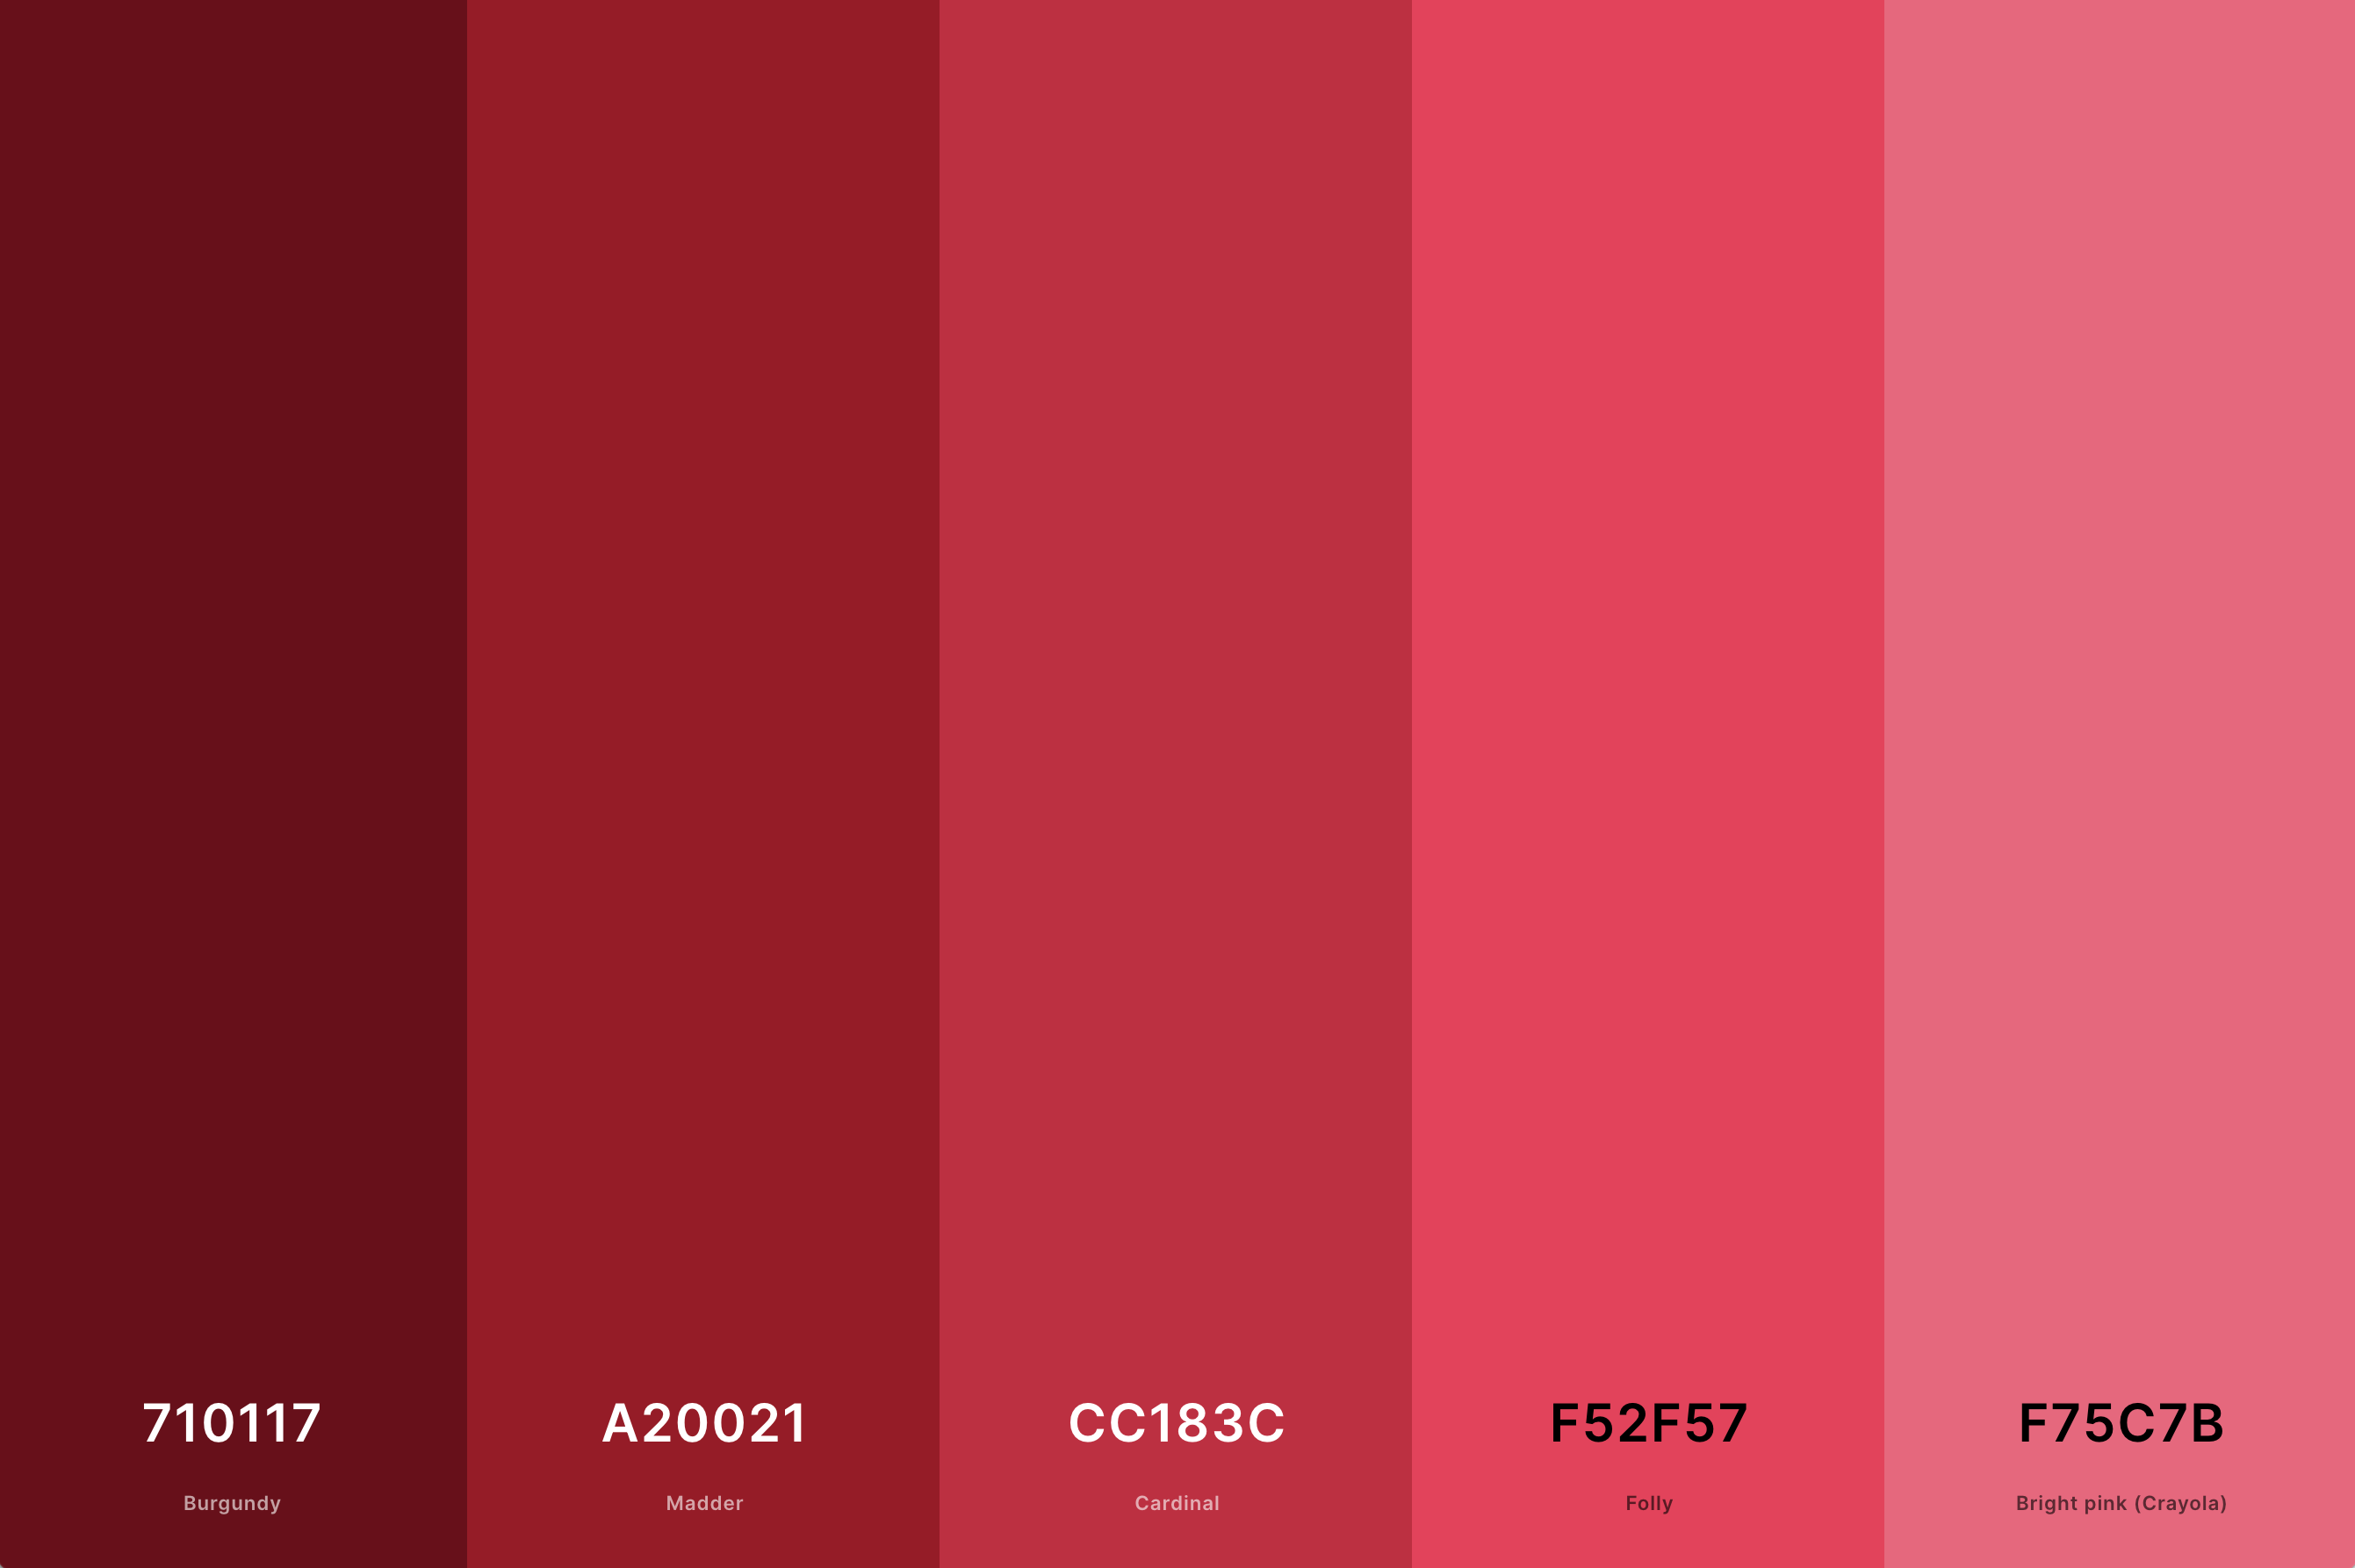 23. Aesthetic Color Palette Red Color Palette with Burgundy (Hex #710117) + Madder (Hex #A20021) + Cardinal (Hex #CC183C) + Folly (Hex #F52F57) + Bright Pink (Crayola) (Hex #F75C7B) Color Palette with Hex Codes